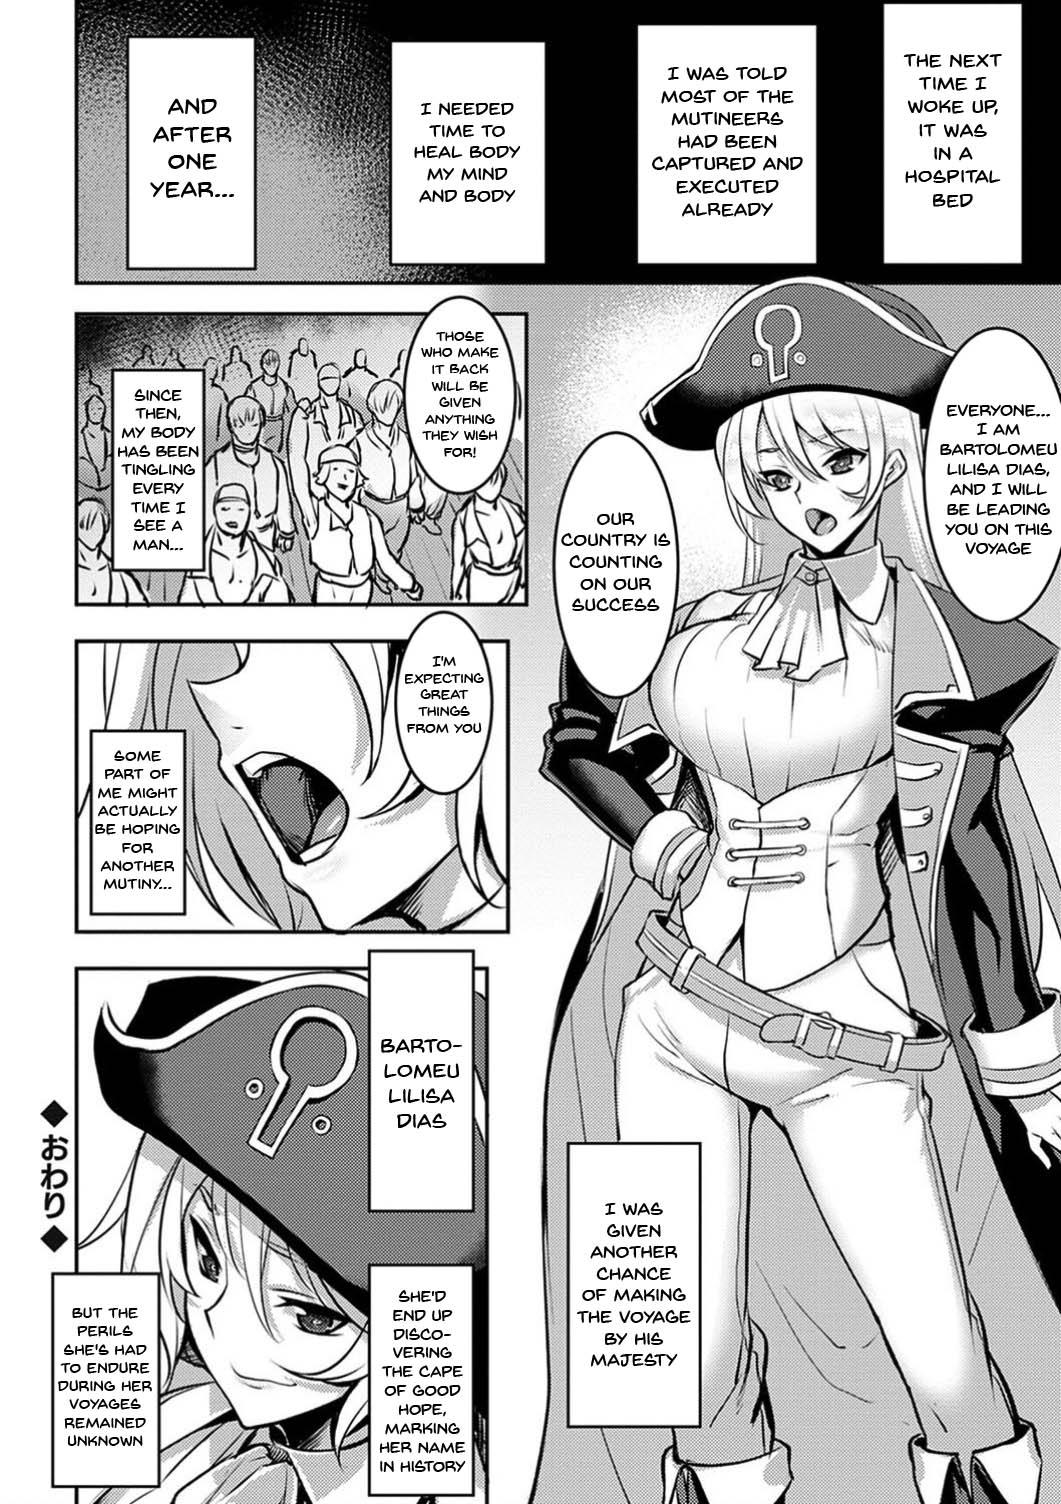 Colombia Dain no Meikyuu | Labyrinth of Indecency Ch. 1-8 Verified Profile - Page 162